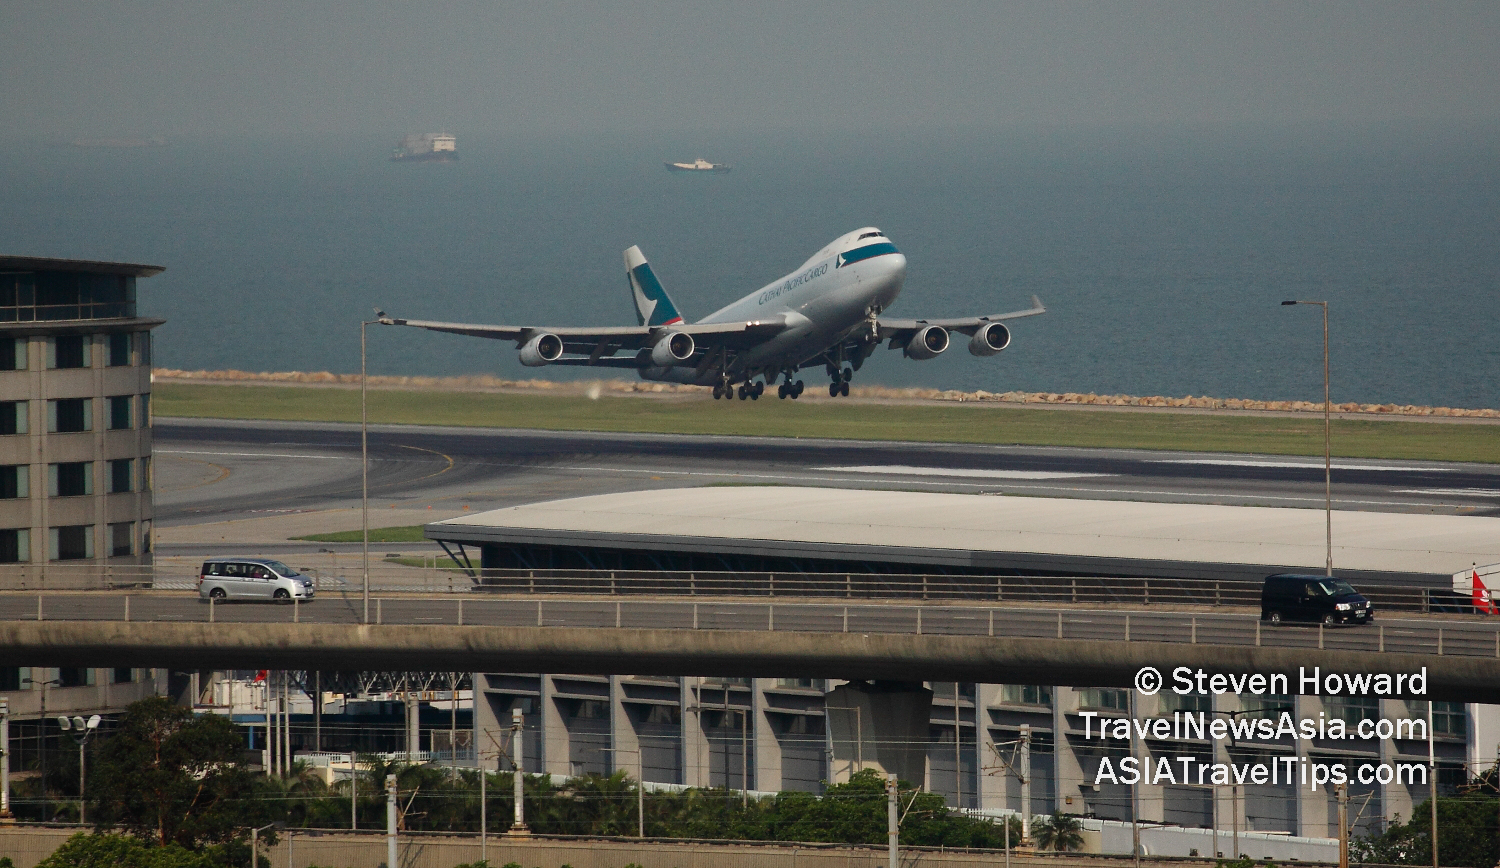 Cathay Pacific Boeing 747 Freighter taking off from HKIA. Picture by Steven Howard of TravelNewsAsia.com Click to enlarge.